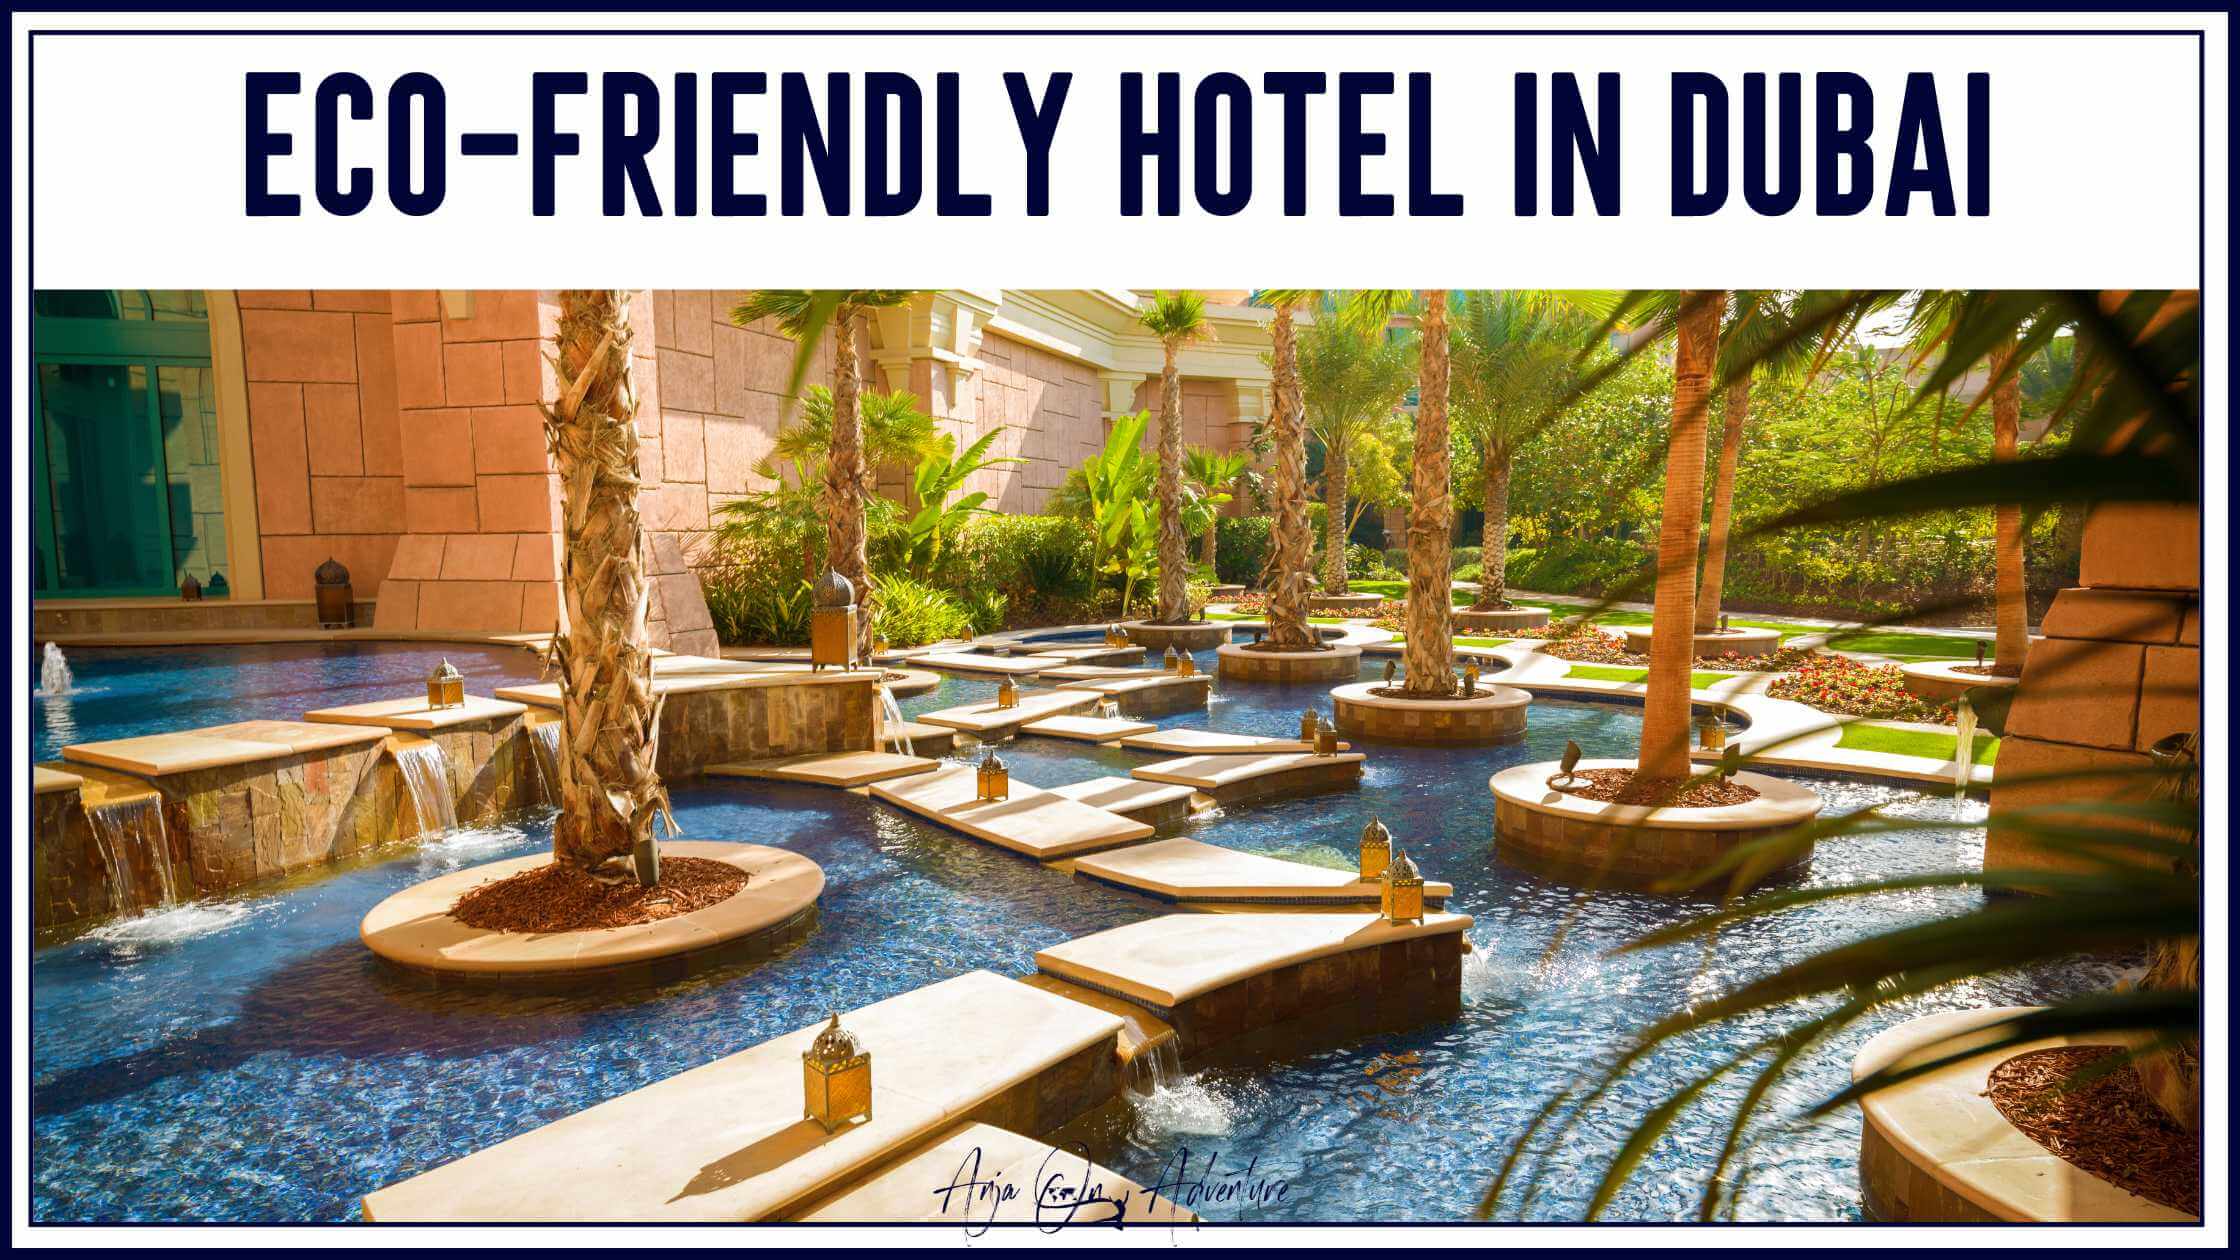 List of sustainable and eco friendly hotels in Dubai. Those Dubai accommodations are doing their best to to reduce environmental footprint, by saving energy, saving water, recycling and by giving equal opportunities to everyone.